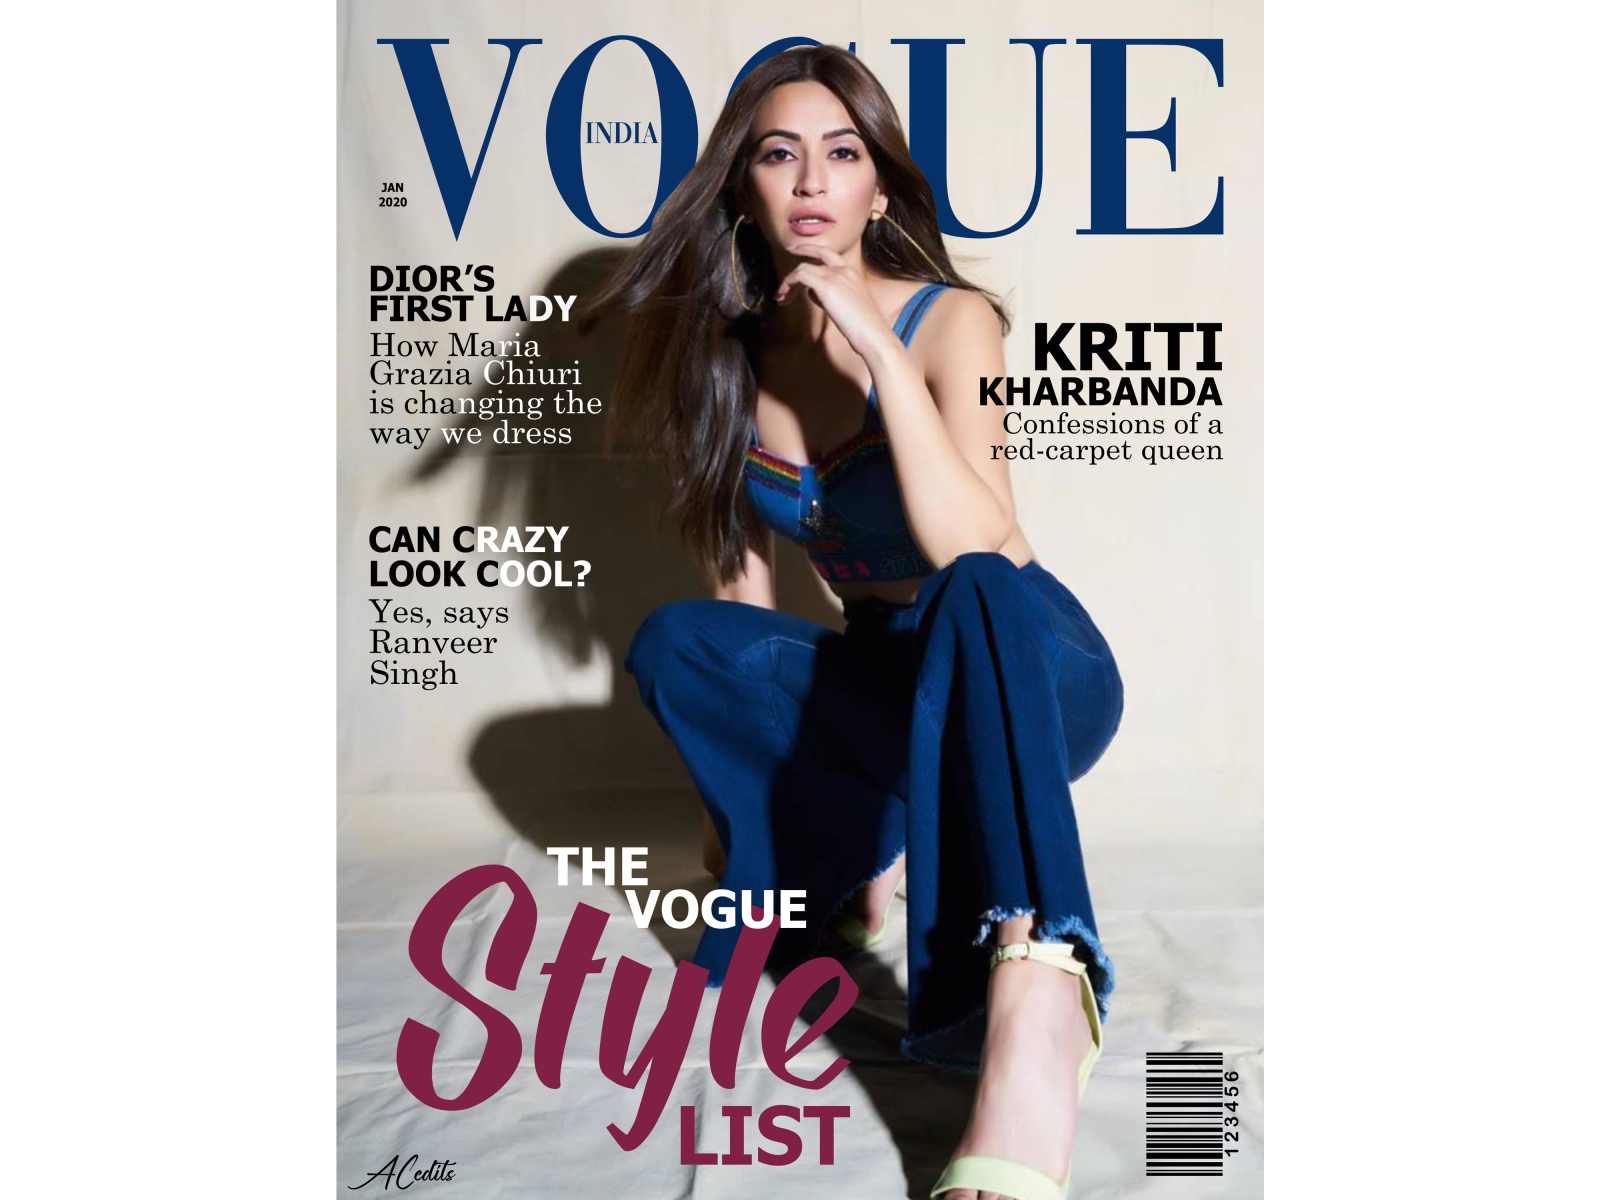 Vogue Magazine Cover Concept by Arun Choudhary on Dribbble